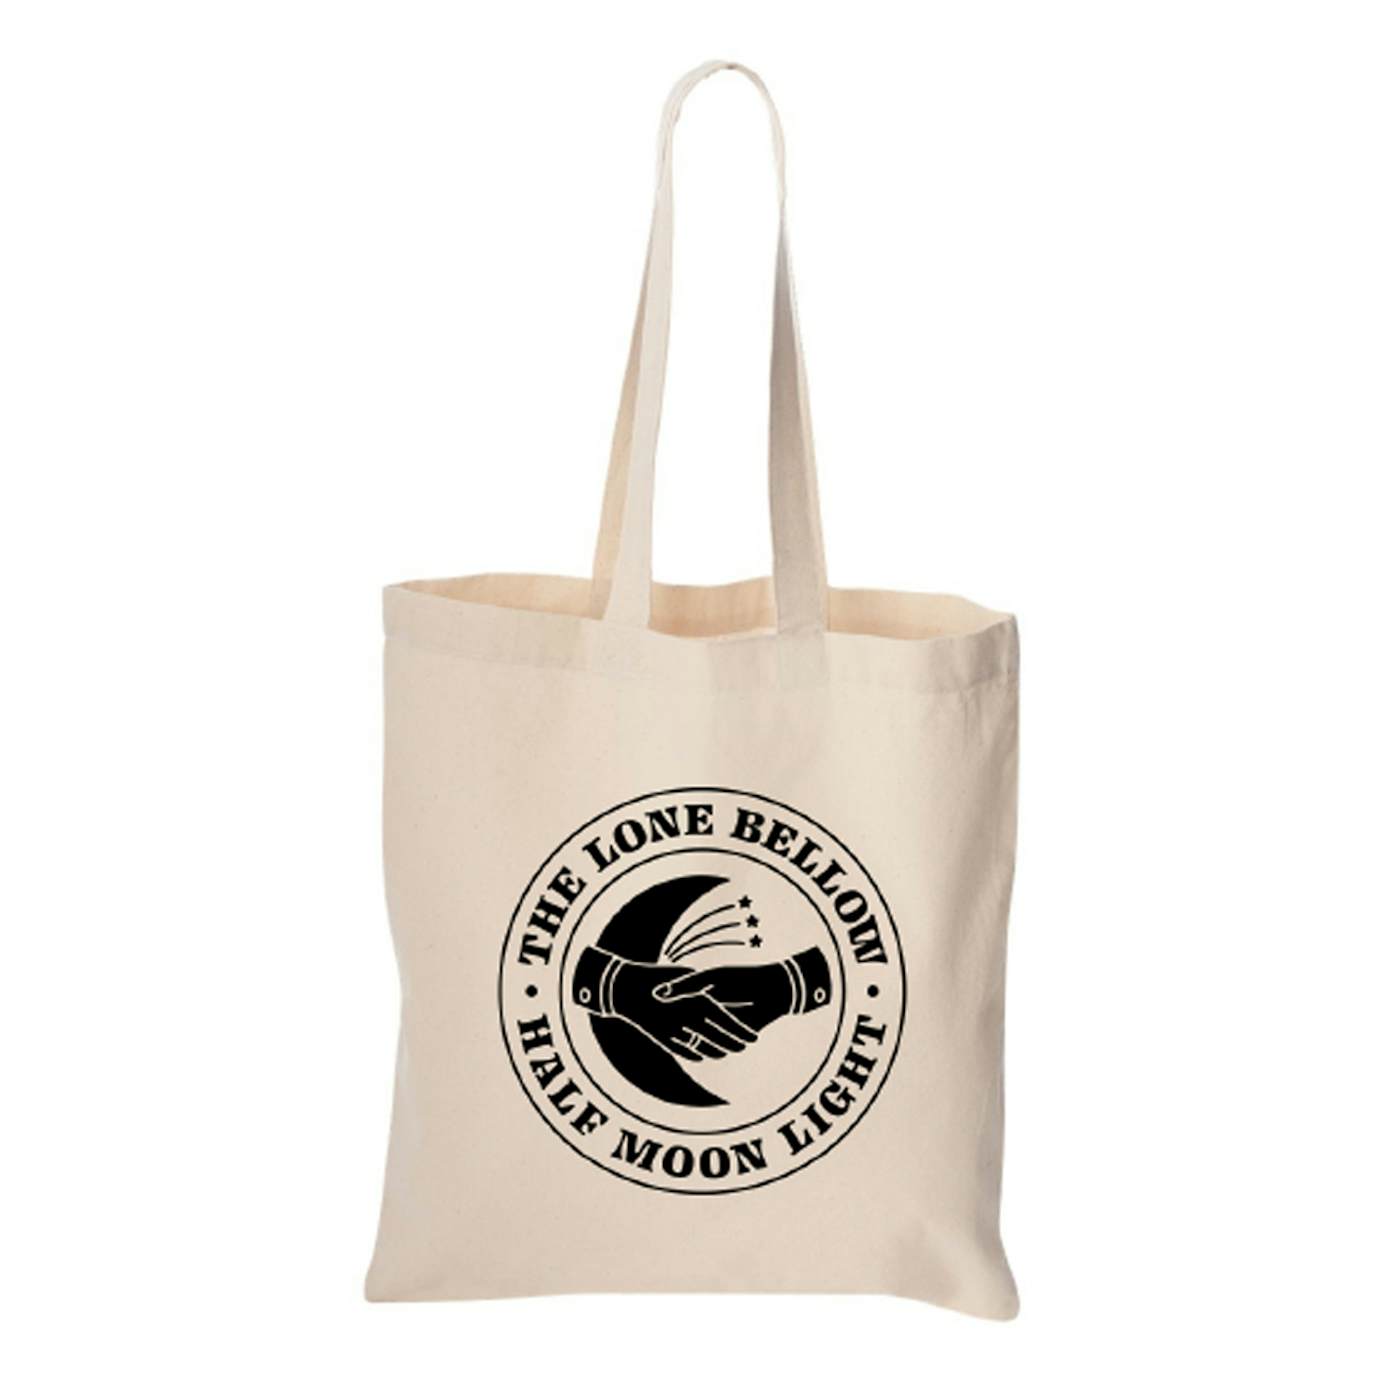 The Lone Bellow Half Moon Light Tote